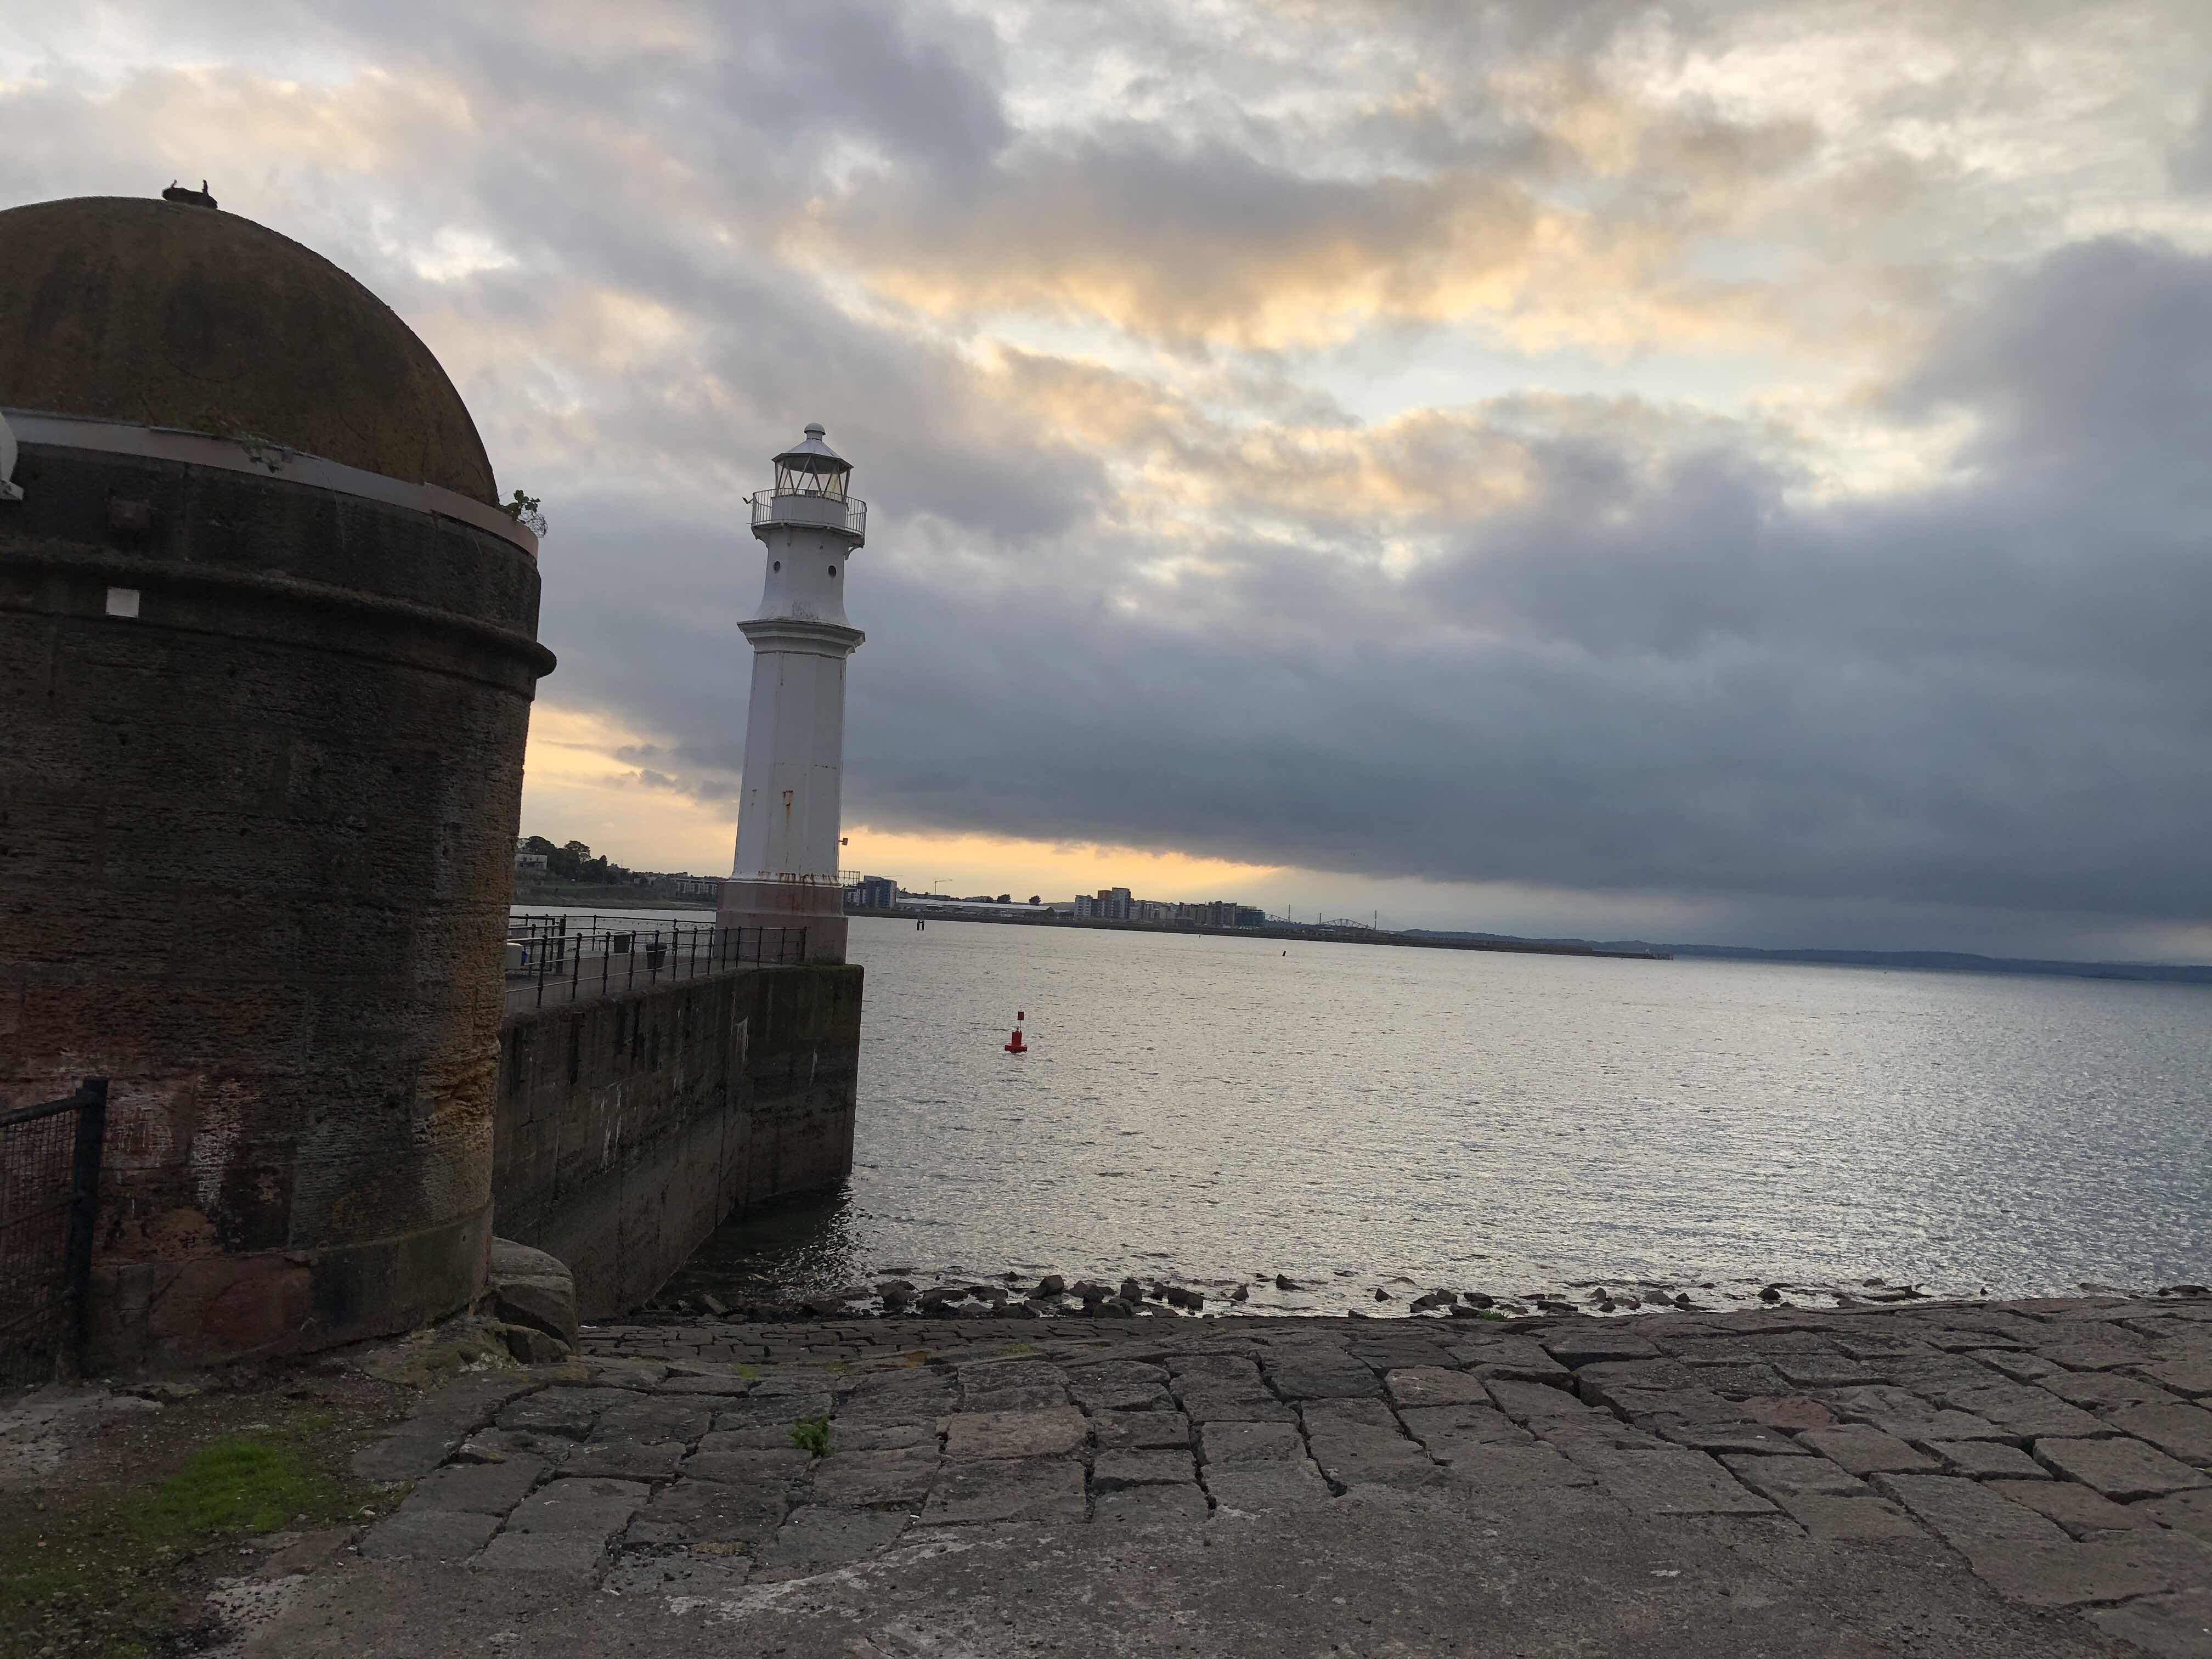 A slender lighthouse almost hidden by a large brick object in the foreground of the image. In the background is the Firth of Forth, the wide river estuary to the north of Edinburgh. 